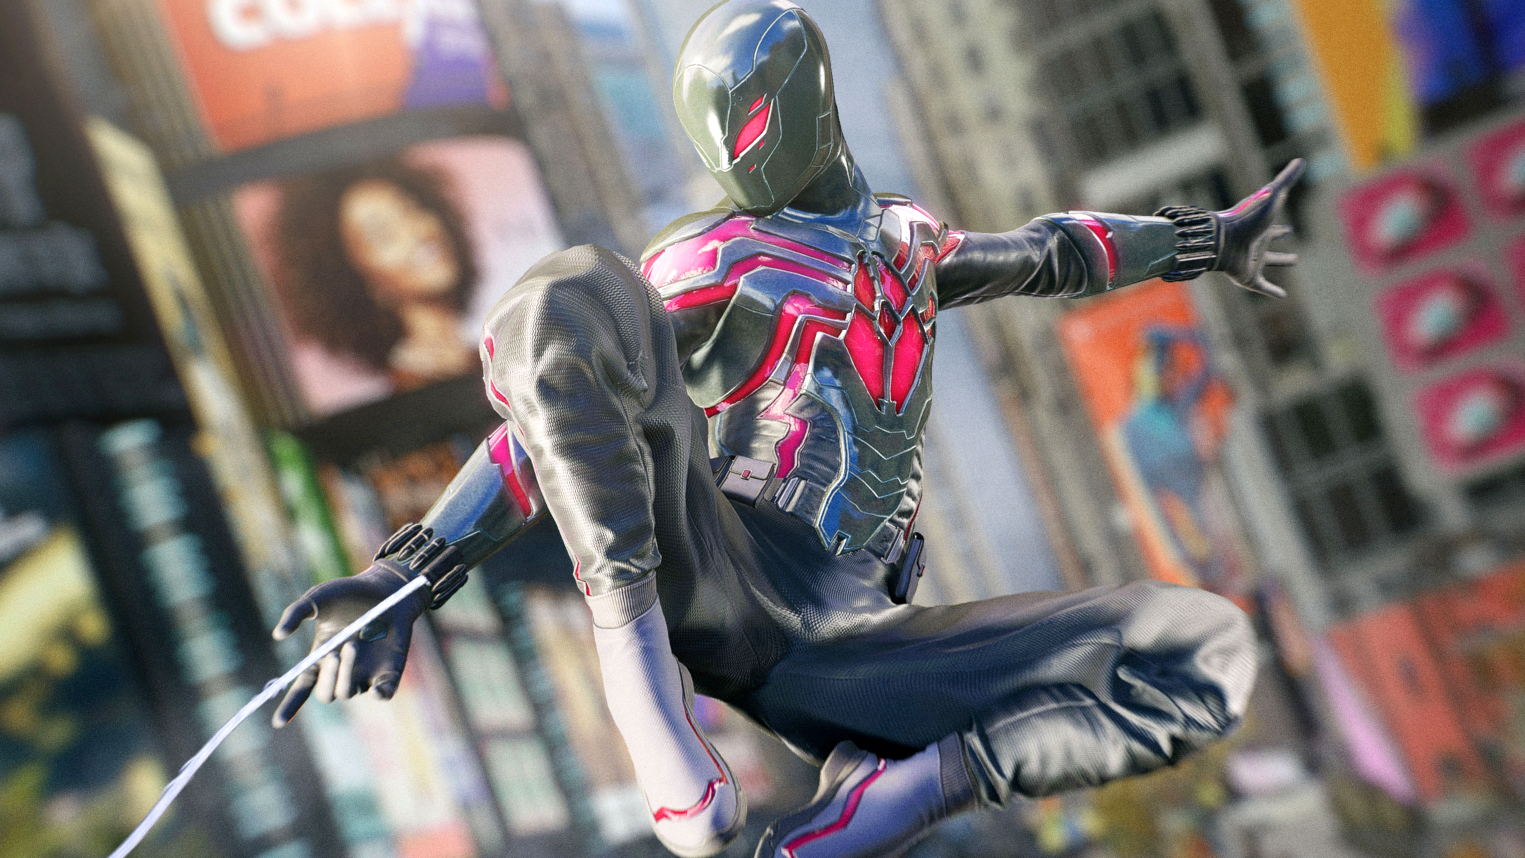 Every Marvel's Spider-Man 2 Suit For Peter & Where It's From